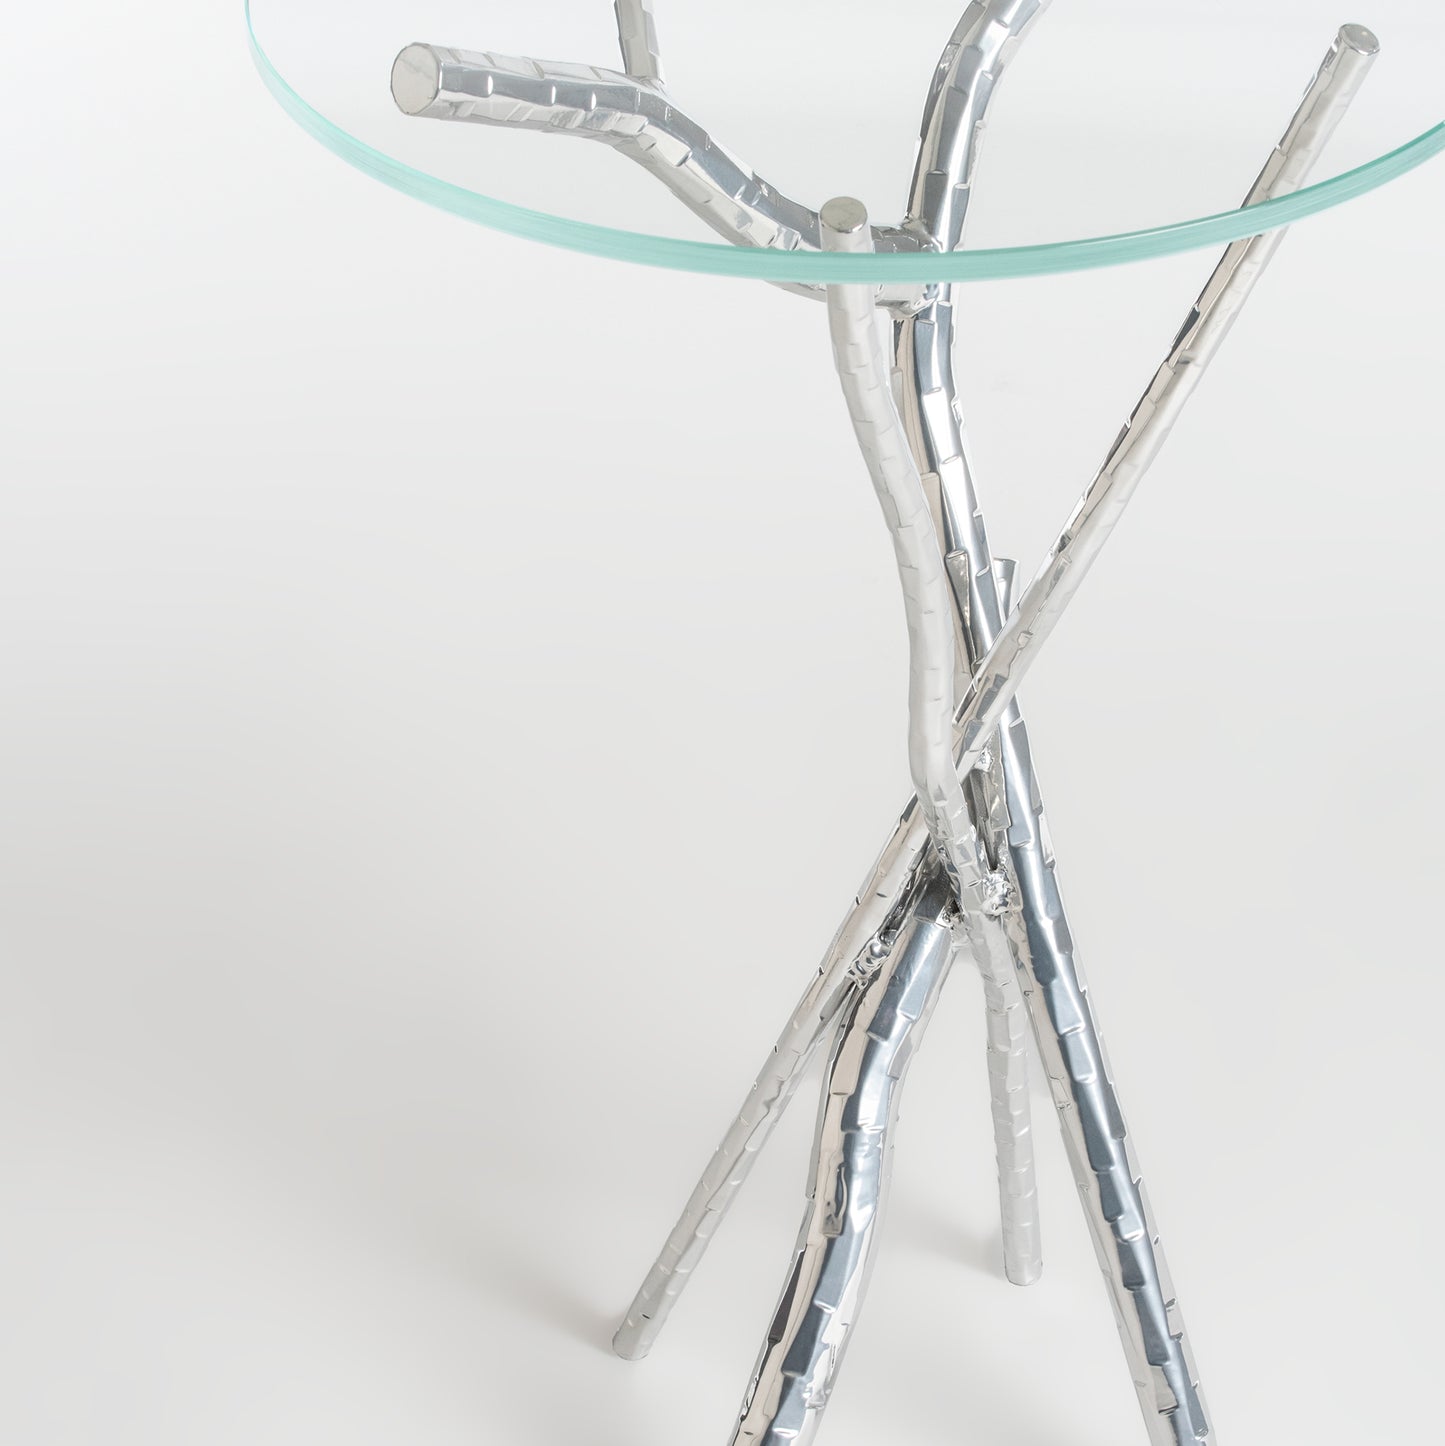 The Hubbardton Forge Brindille Accent Table is a stunning occasional table featuring a hand-hammered steel base and delicate branch-inspired design. The combination of glass and metal creates a contemporary yet natural aesthetic.